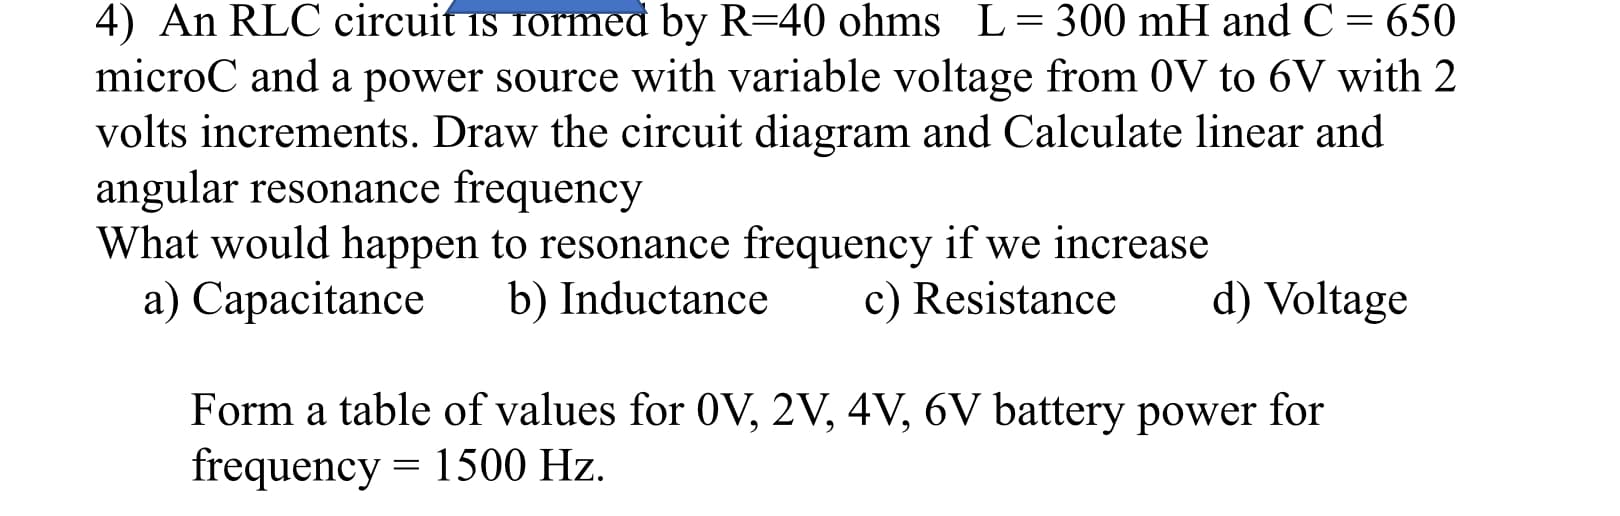 4) An RLC circuit is rormed by R=40 ohms L=300 mH and C = 650
microC and a power source with variable voltage from 0V to 6V with 2
volts increments. Draw the circuit diagram and Calculate linear and
angular resonance frequency
What would happen to resonance frequency if we increase
a) Capacitance
b) Inductance
c) Resistance
d) Voltage
Form a table of values for 0V, 2V, 4V, 6V battery power for
frequency = 1500 Hz.
